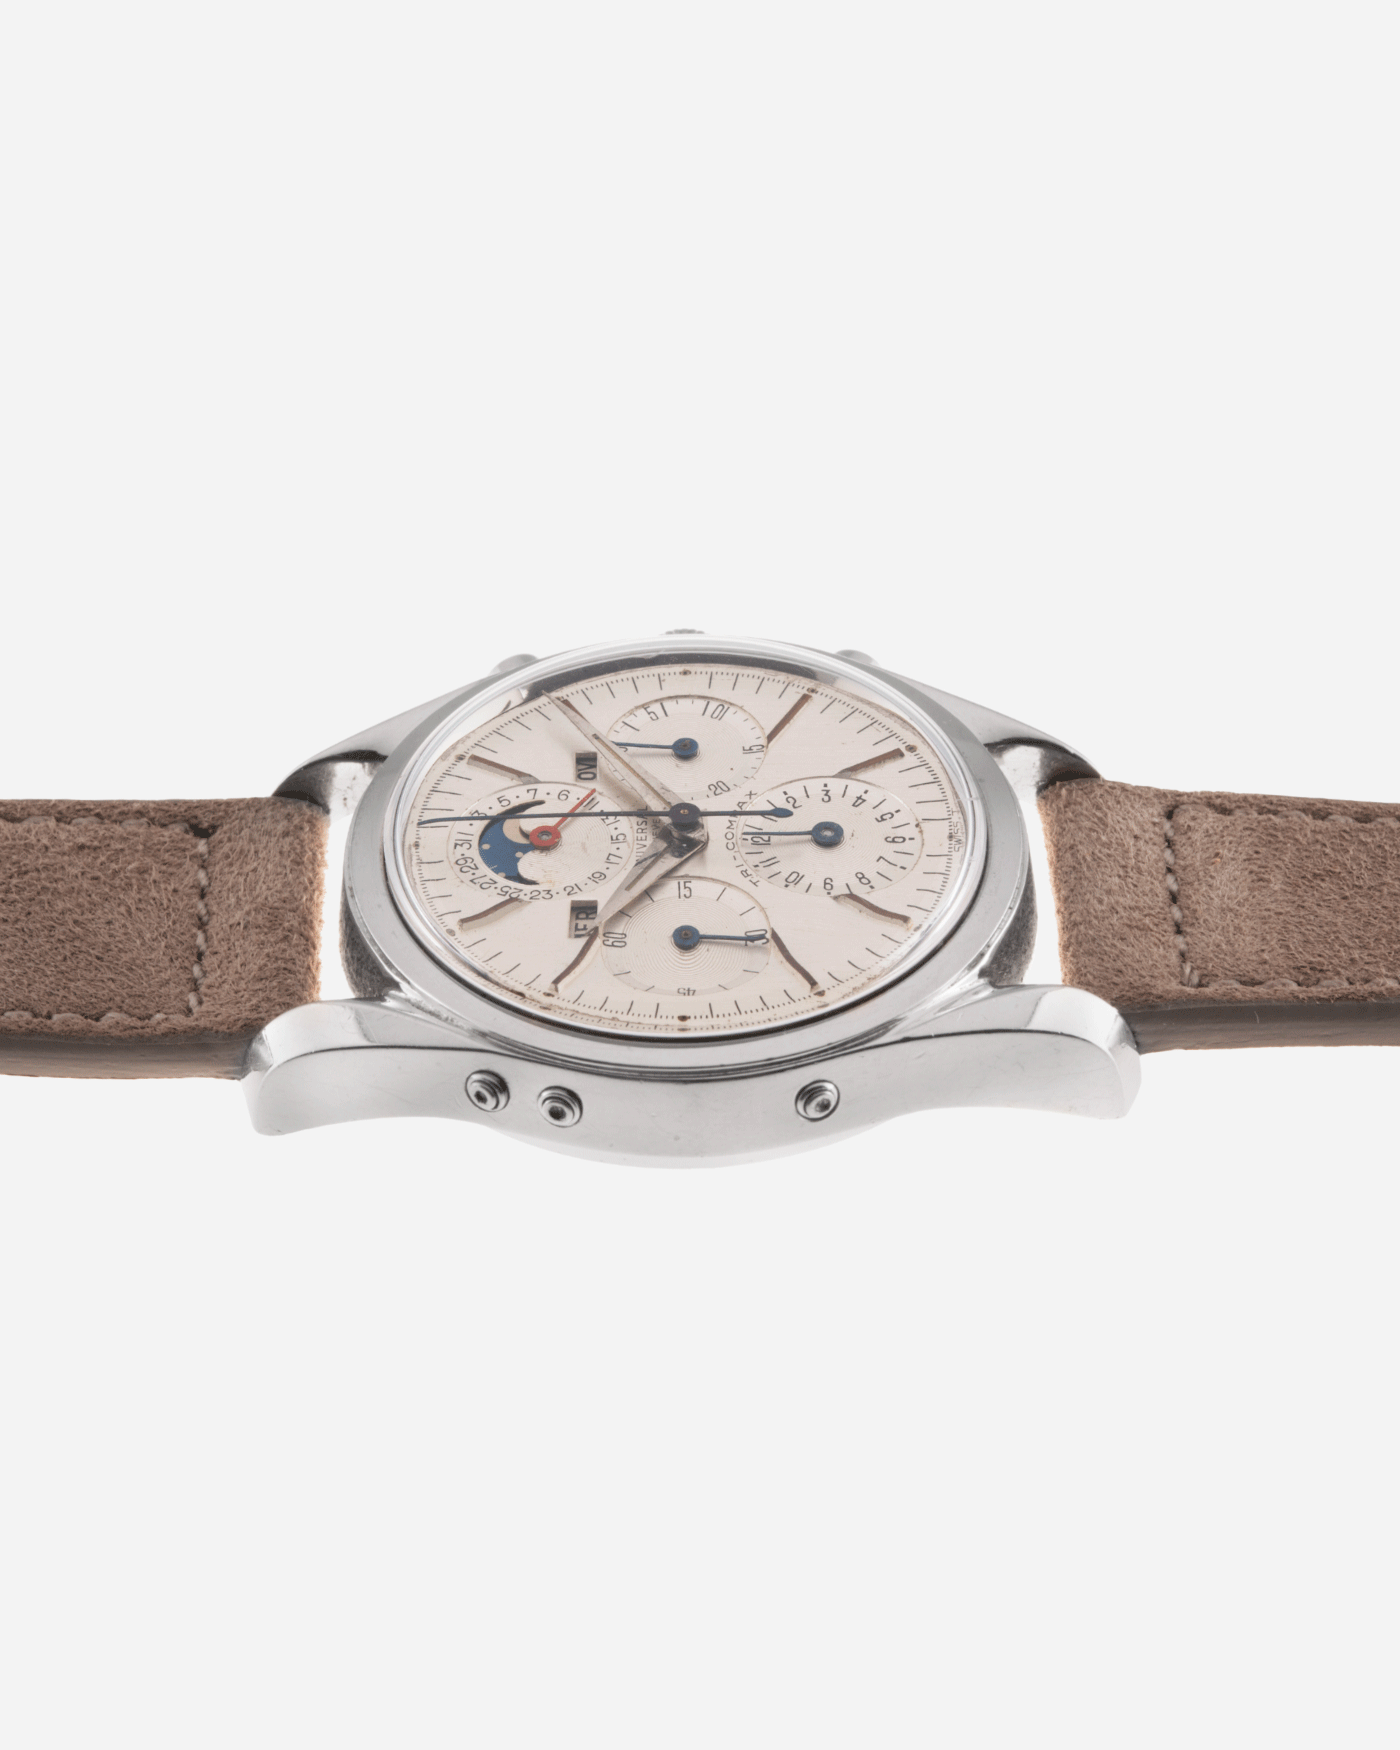 Brand: Universal Geneve Year: 1960’s Reference Number: 222100 Material: Stainless Steel Movement: Cal. 281 Case Diameter: 36mm Lug Width: 18mm Strap: Molequin Taupe Nubuck and Stainless Steel Buckle